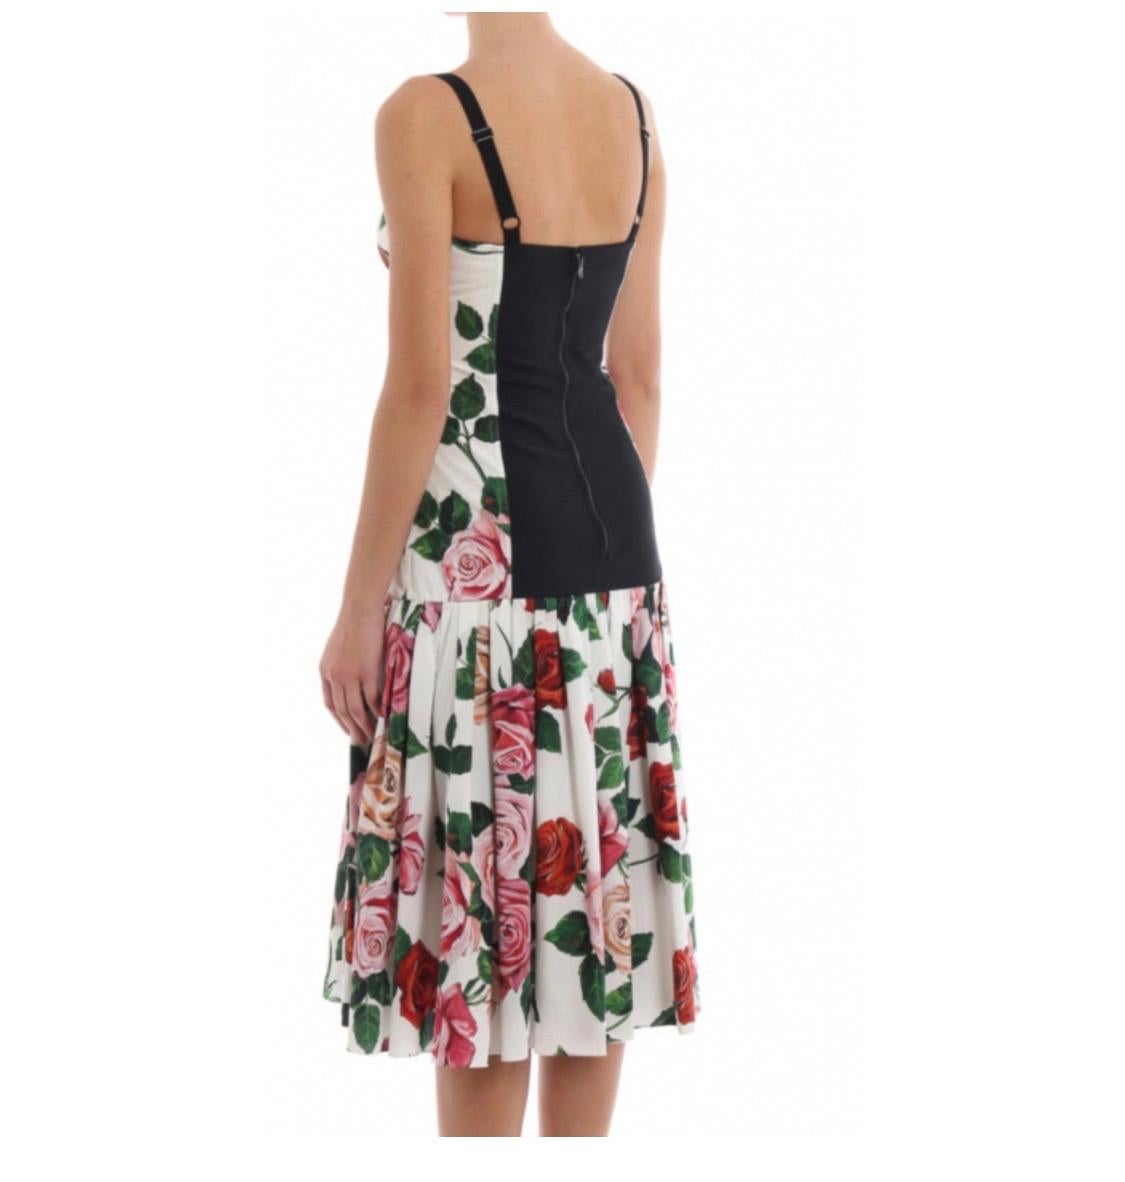 Dolce & Gabbana dress made from
flower printed stretch cotton poplin In Fair Condition For Sale In WELWYN, GB